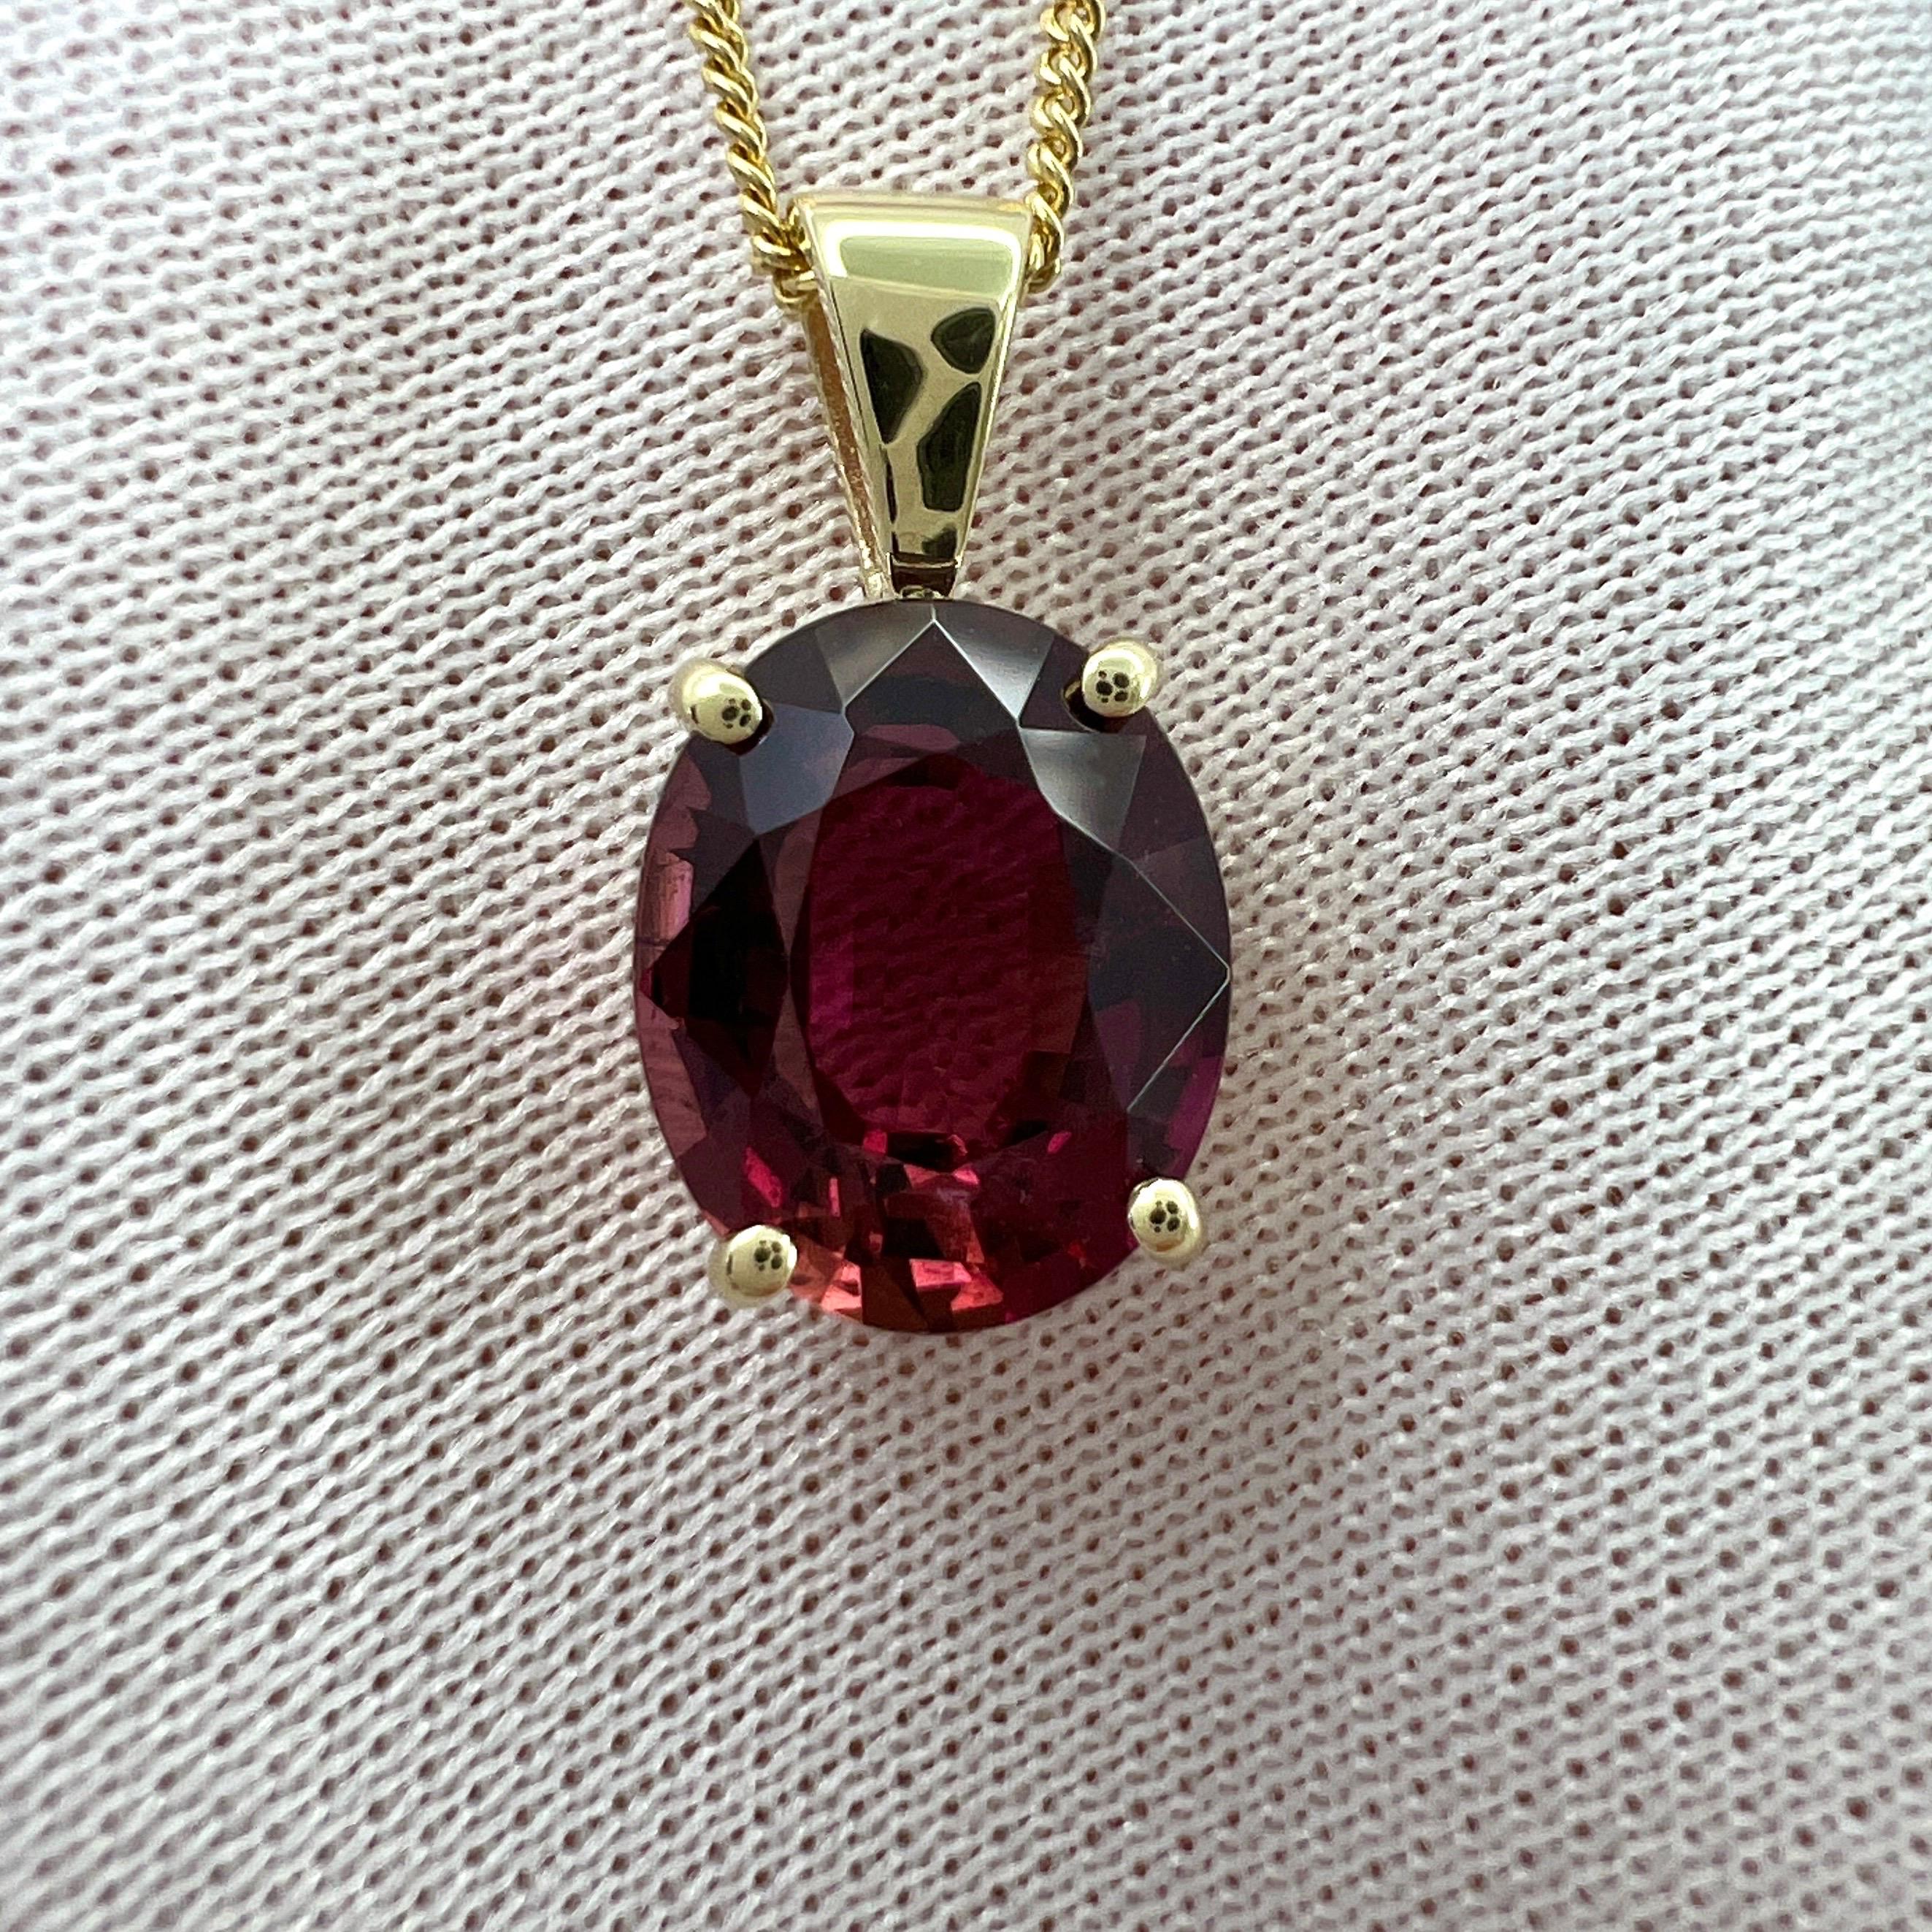 2.66ct Rubellite Tourmaline Pink Oval Cut 9k Yellow Gold Pendant Necklace For Sale 7